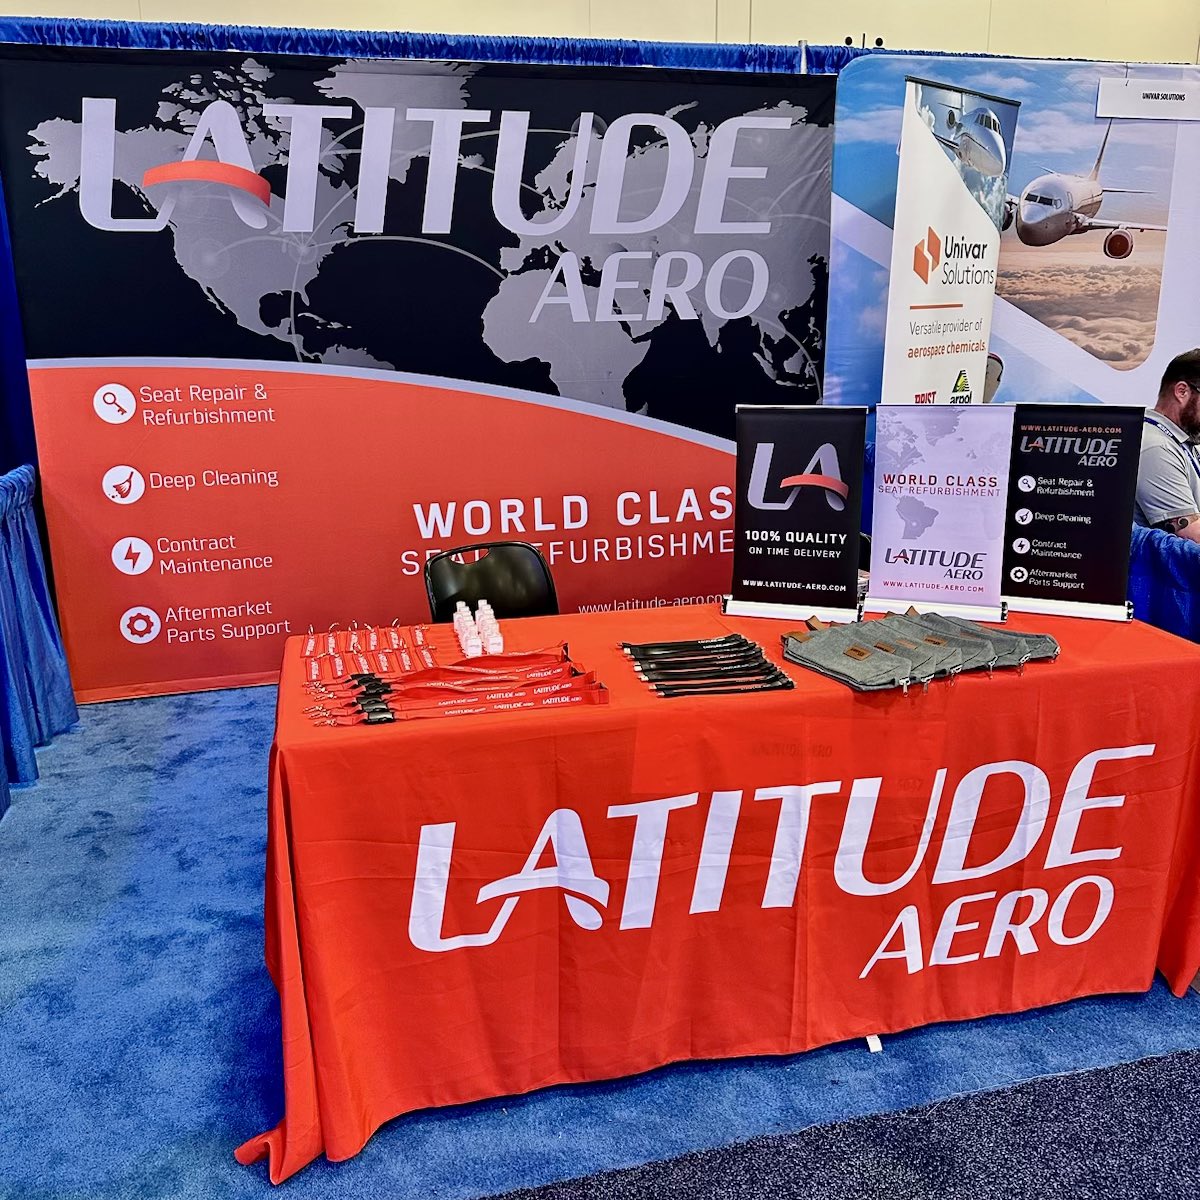 The first day of @PBExpo was a huge success! If you didn’t catch us today, drop by booth #5047 tomorrow to meet our Latitude Aero sales team. 👋 #PBExpo #Miami #PBExpo2024 #Florida #Aviation #LatitudeAero #PaxEx #AvGeek #MRO #Sponsor